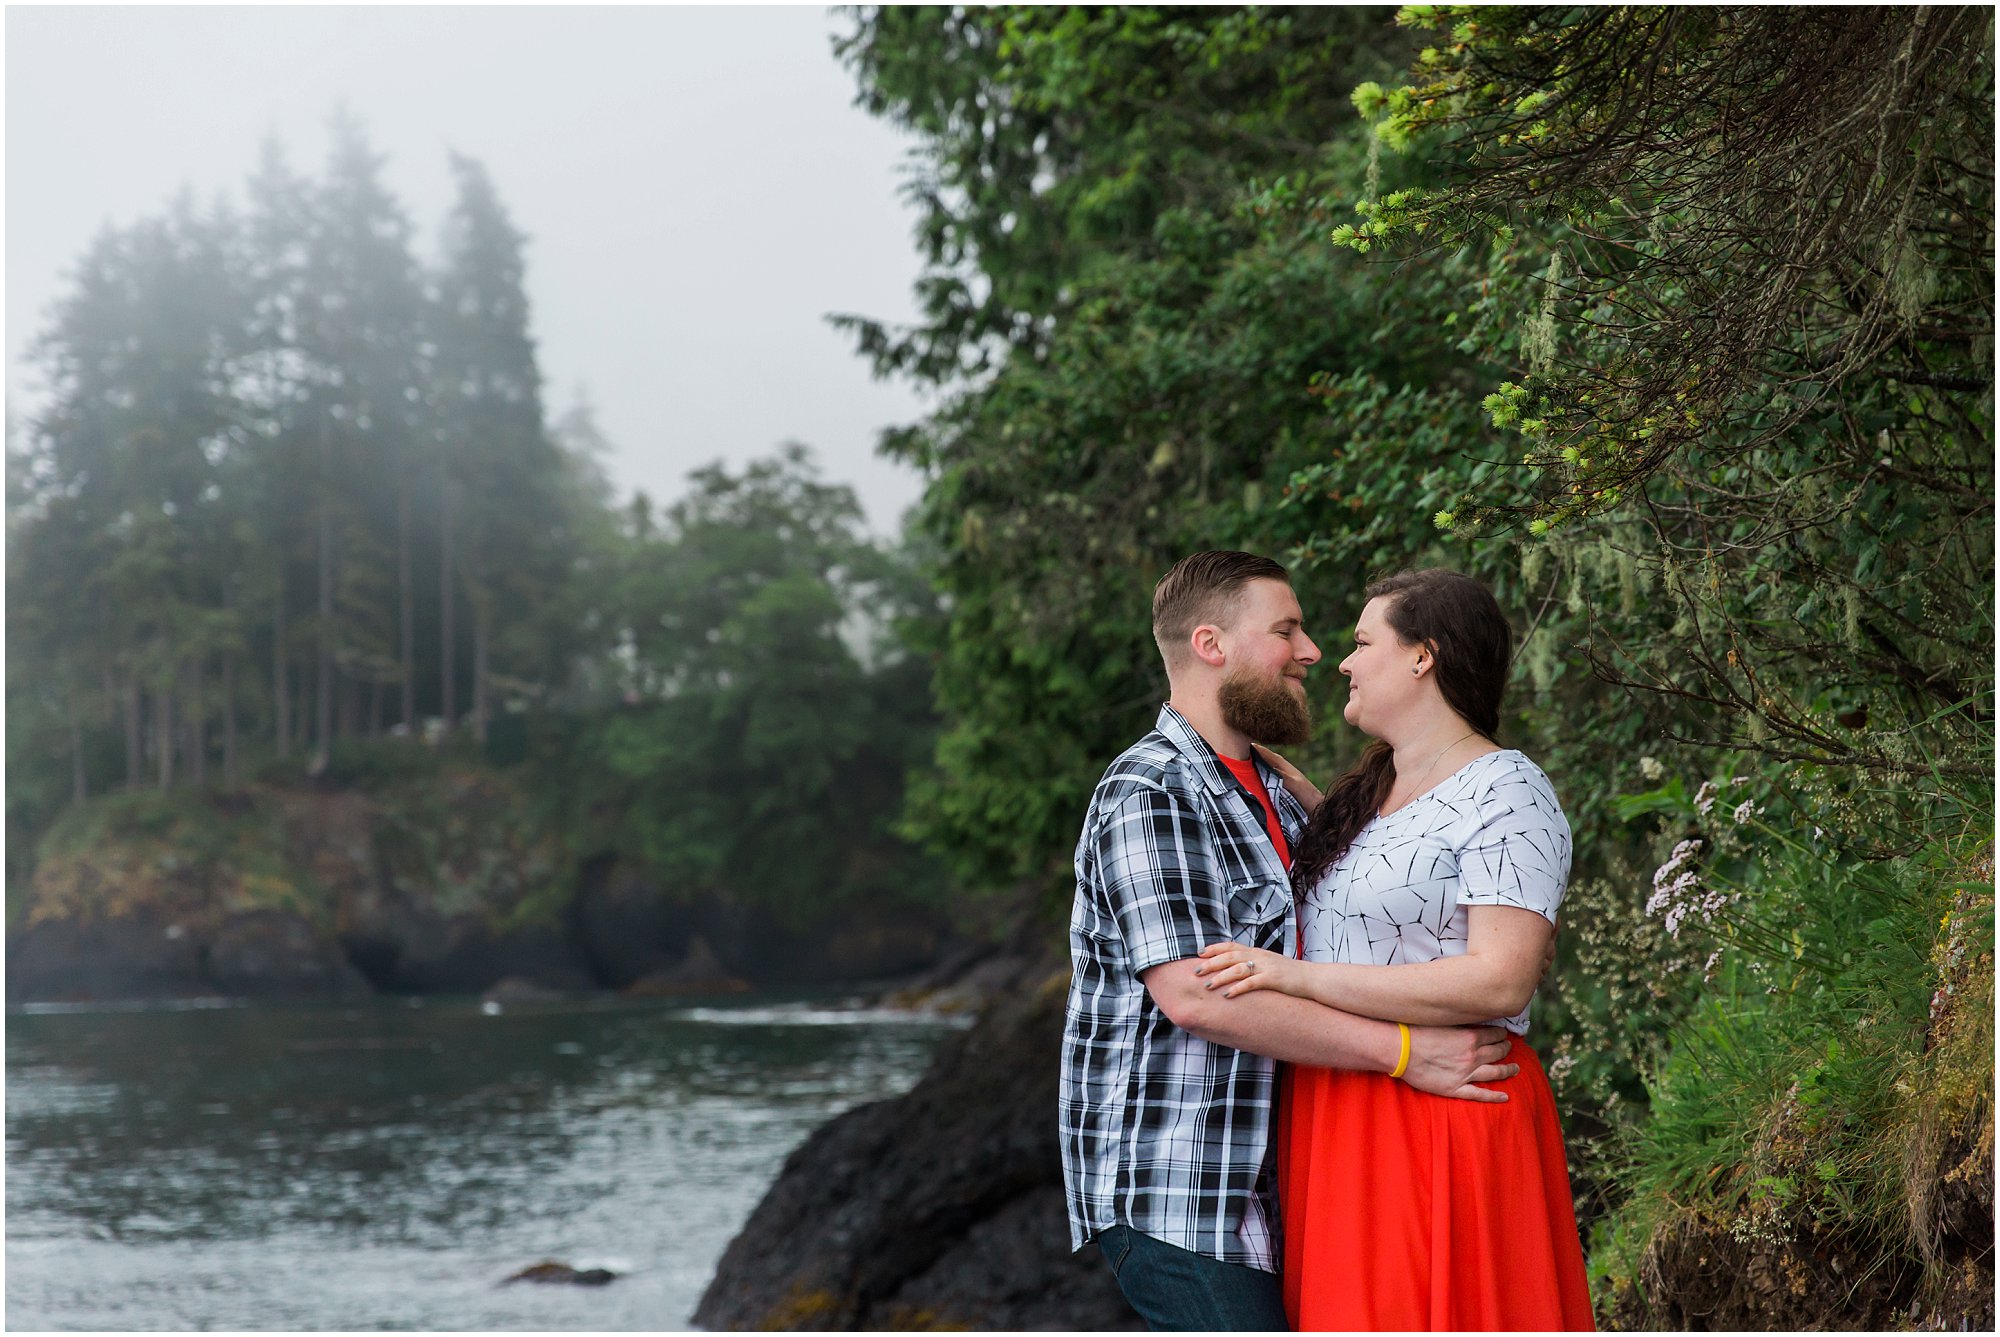 A gorgeous Pacific Northwest coastal adventure session at Salt Creek Recreation Area outside of Port Angeles, WA. | Erica Swantek Photography